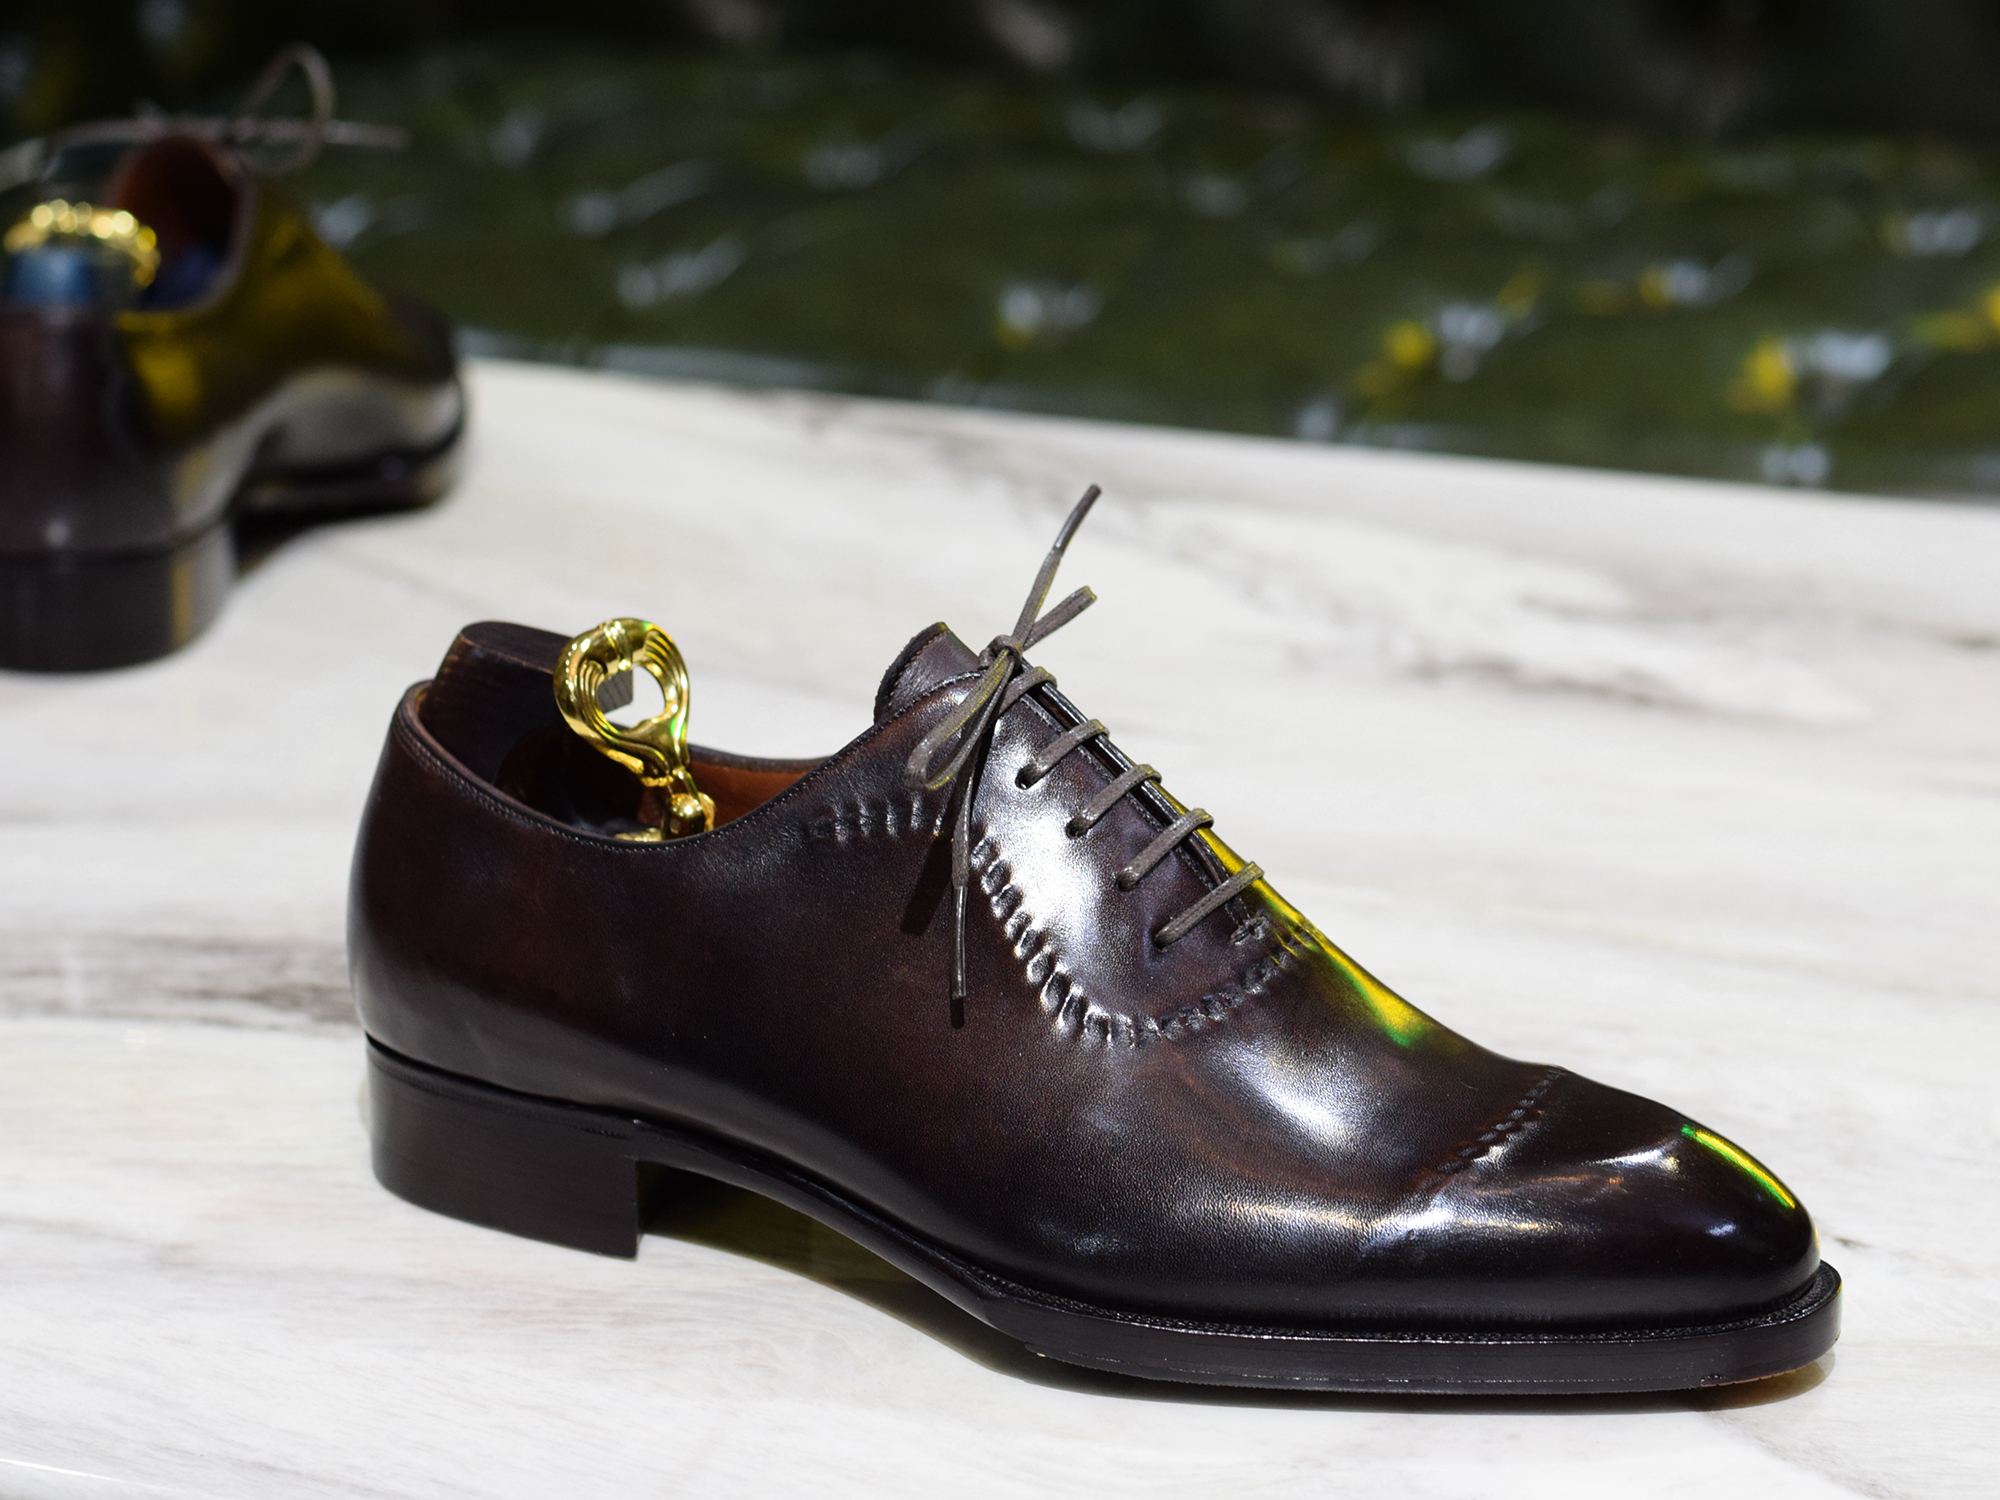 MTO Handwelt Adelaide Reverse Blind shoes - Coffee&Cherry